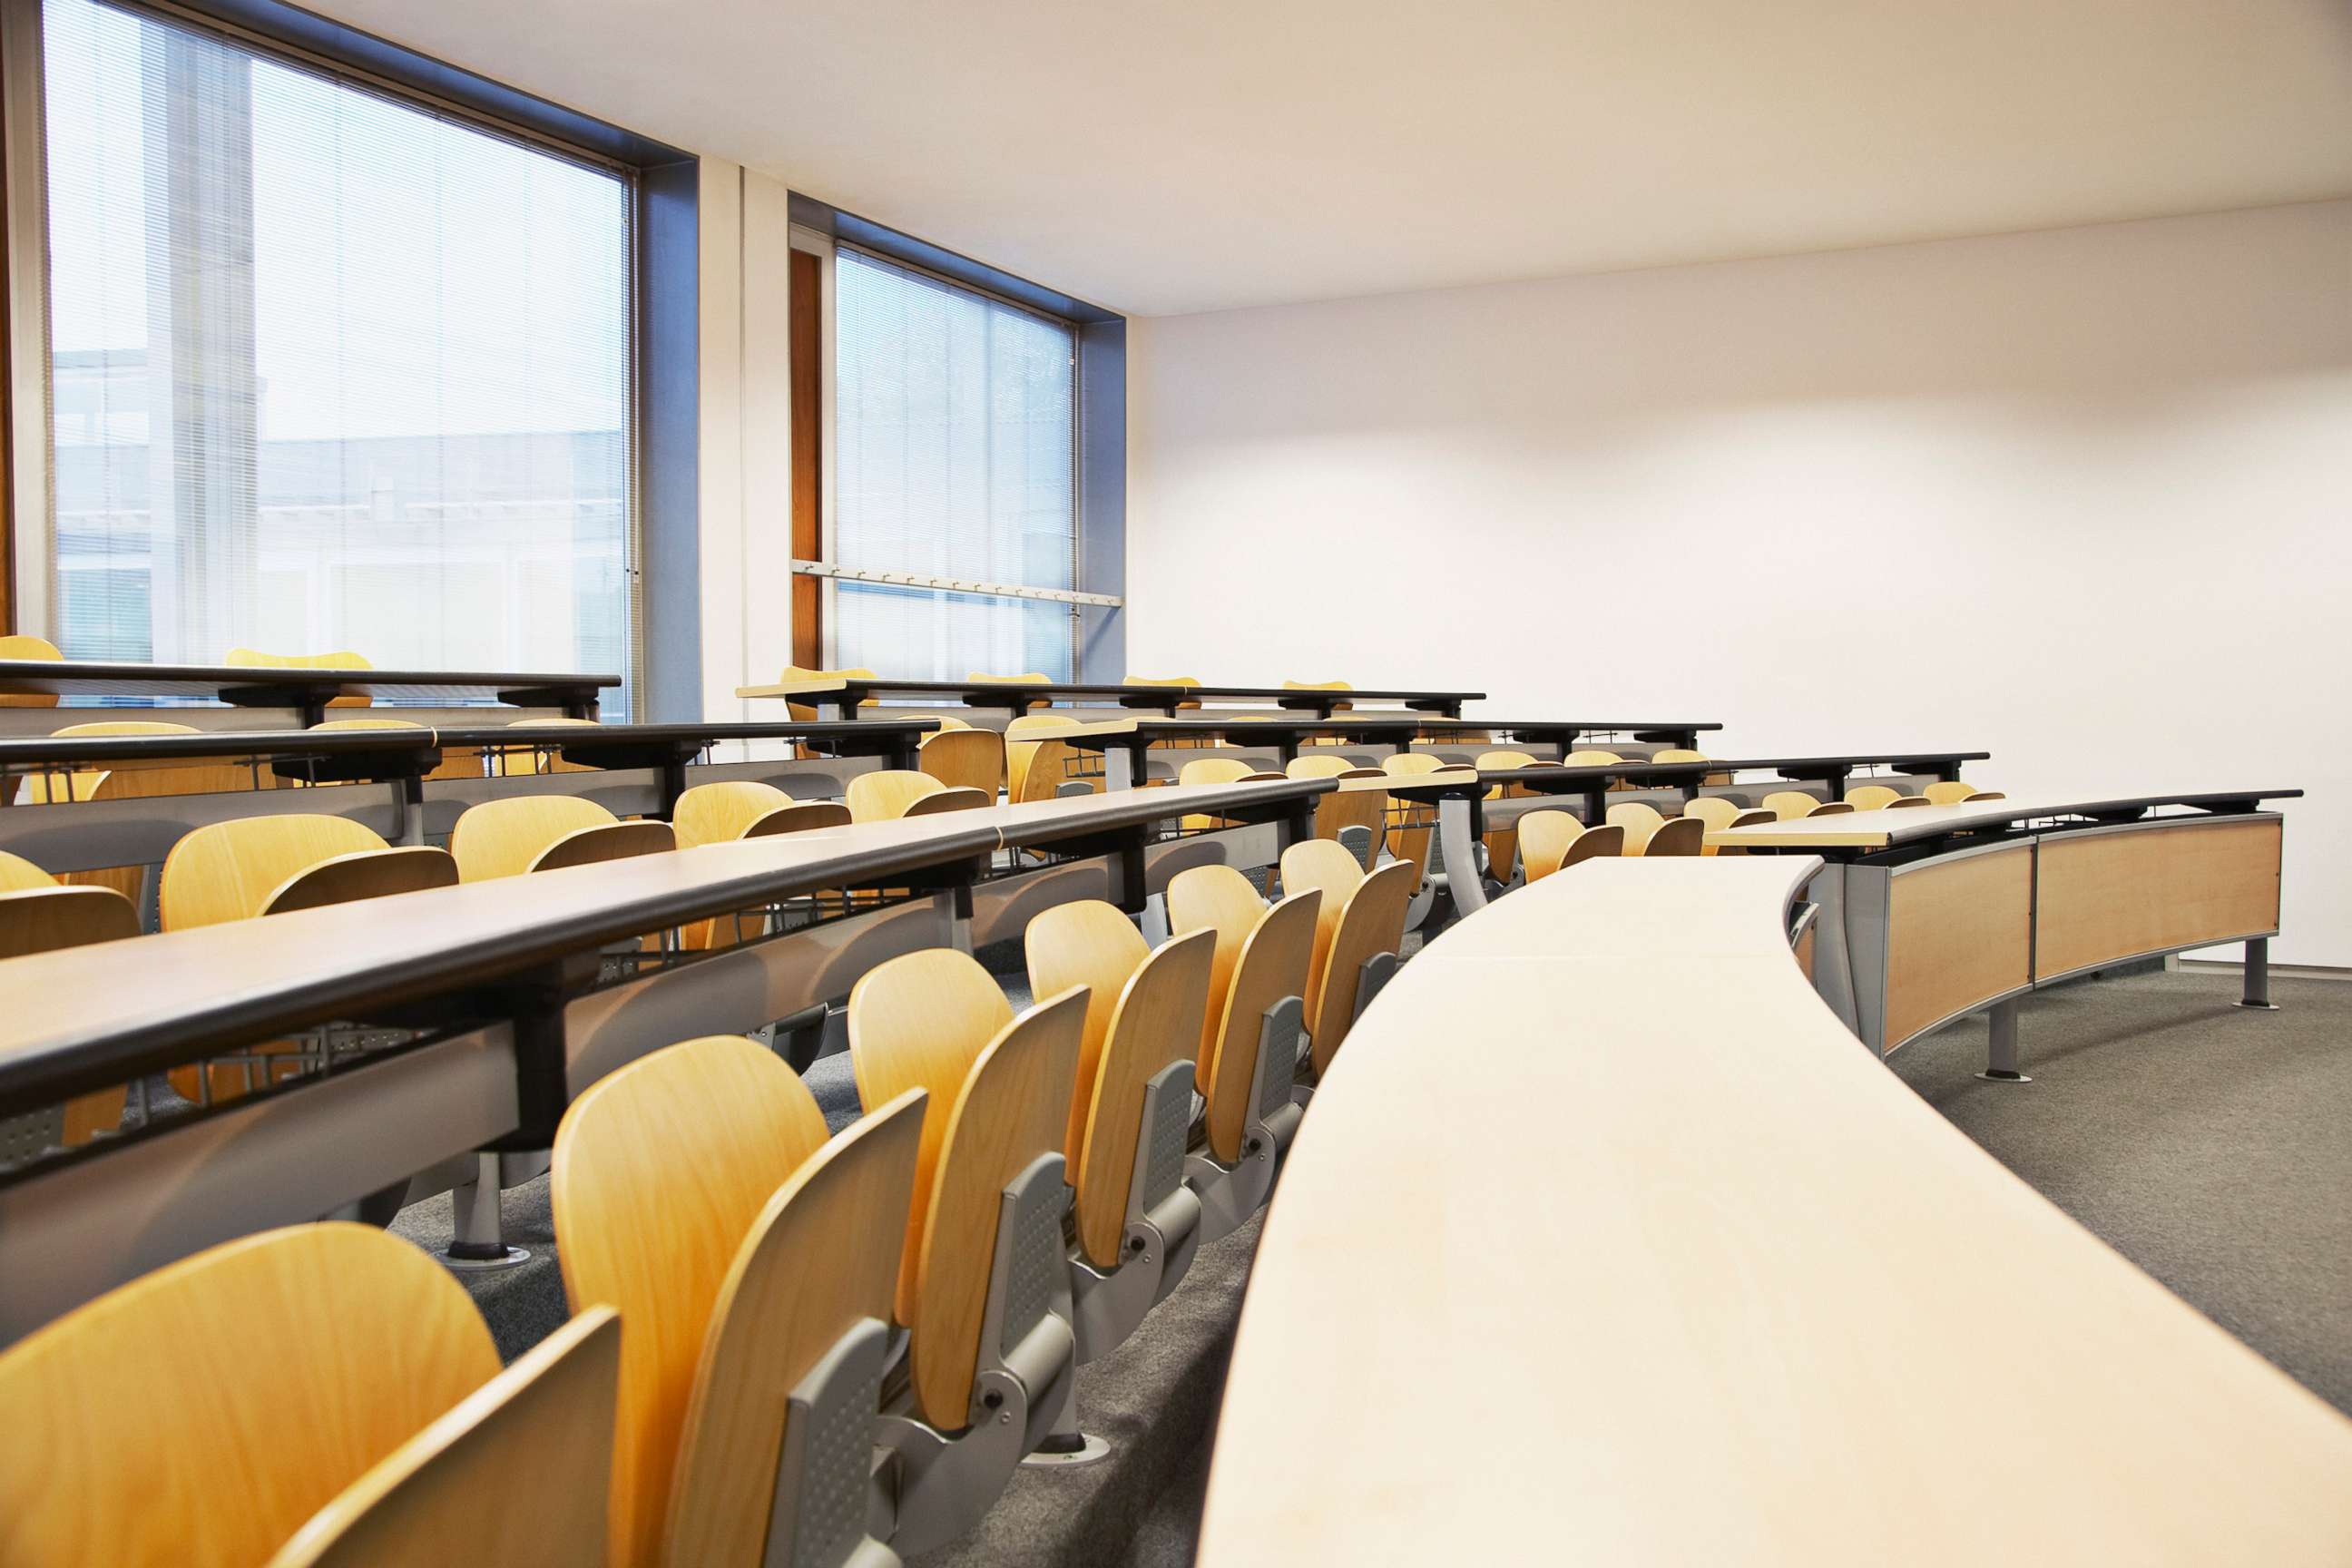 PHOTO: A stock photo of a college classroom is seen here.